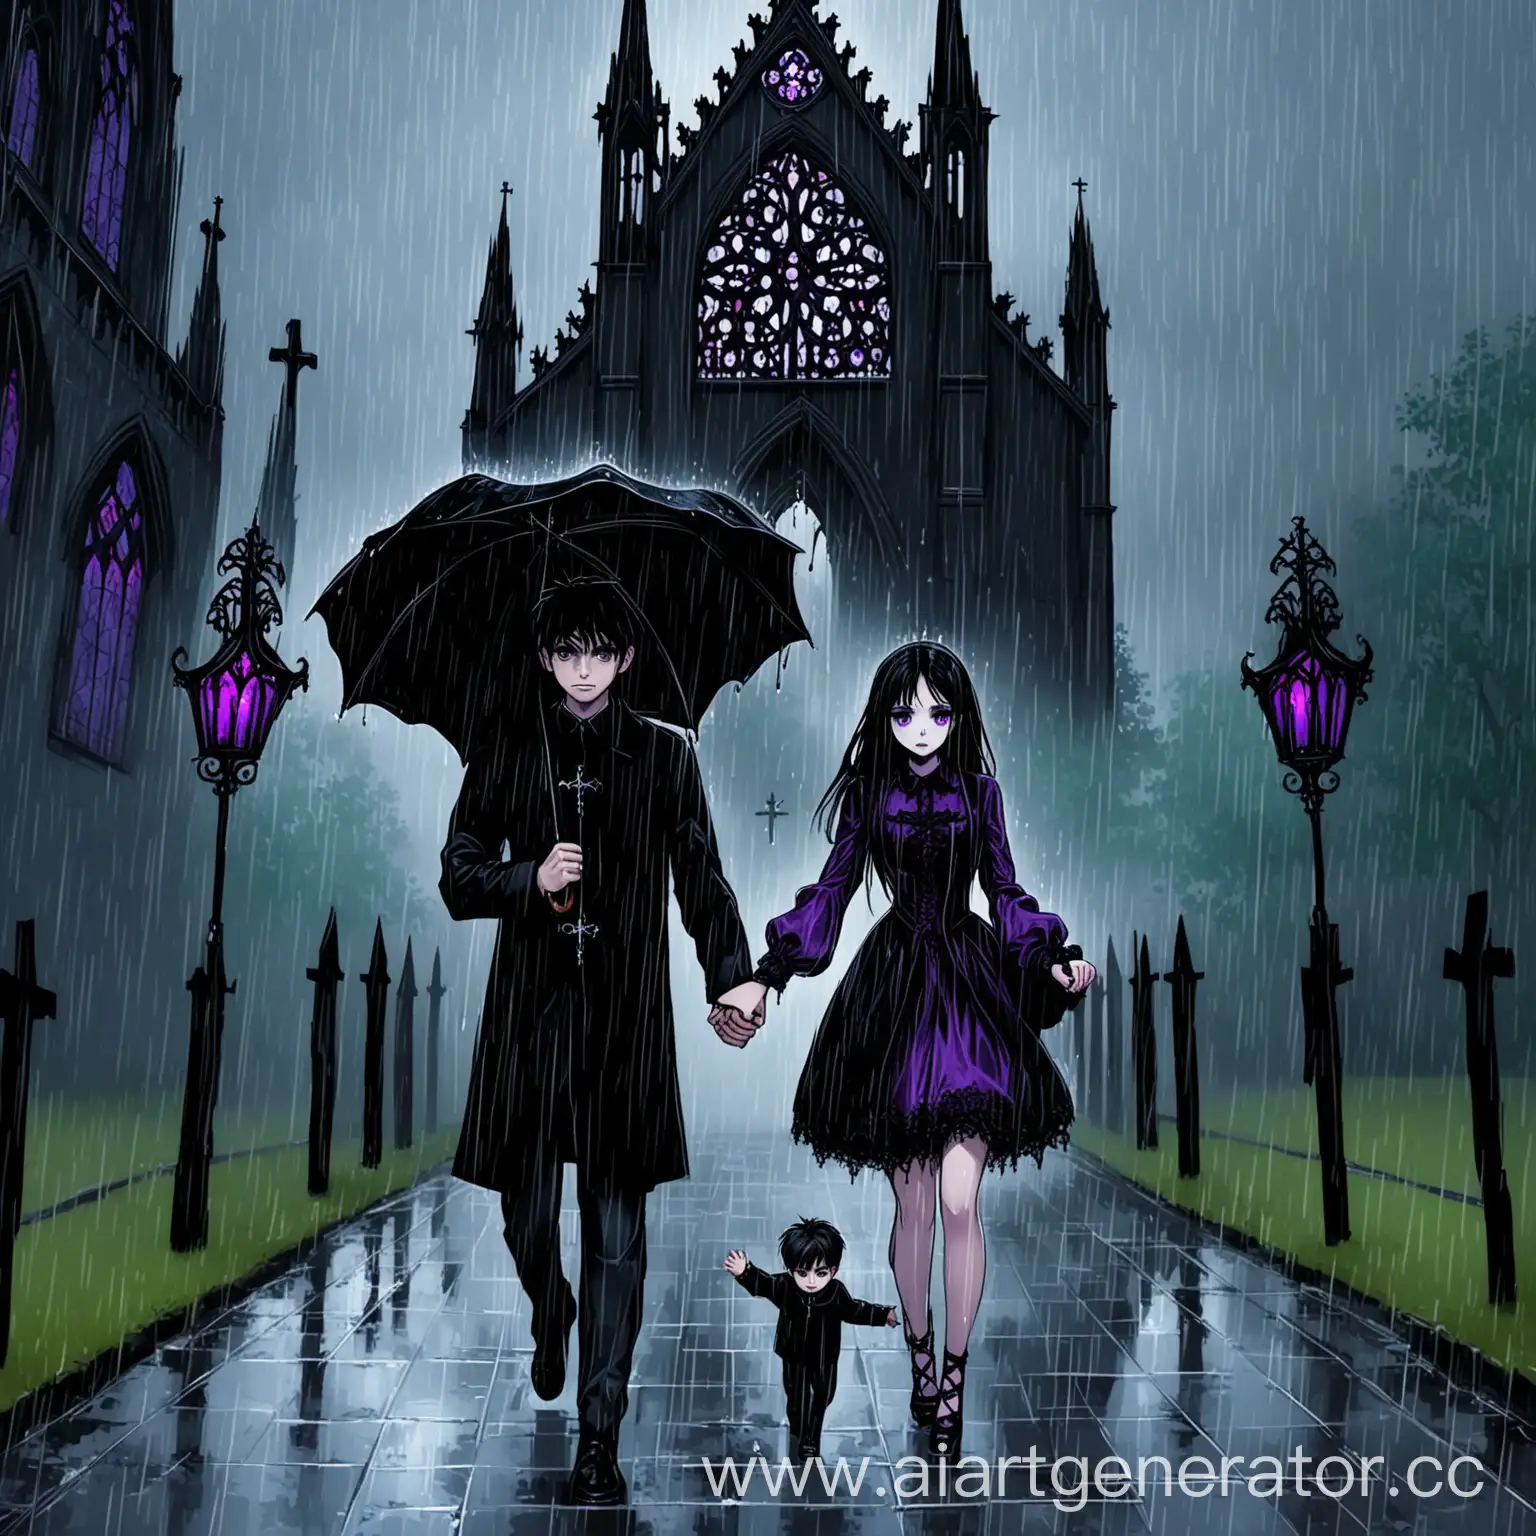 DarkHaired-Girl-and-Boy-Walking-to-Gothic-Chapel-in-Rain